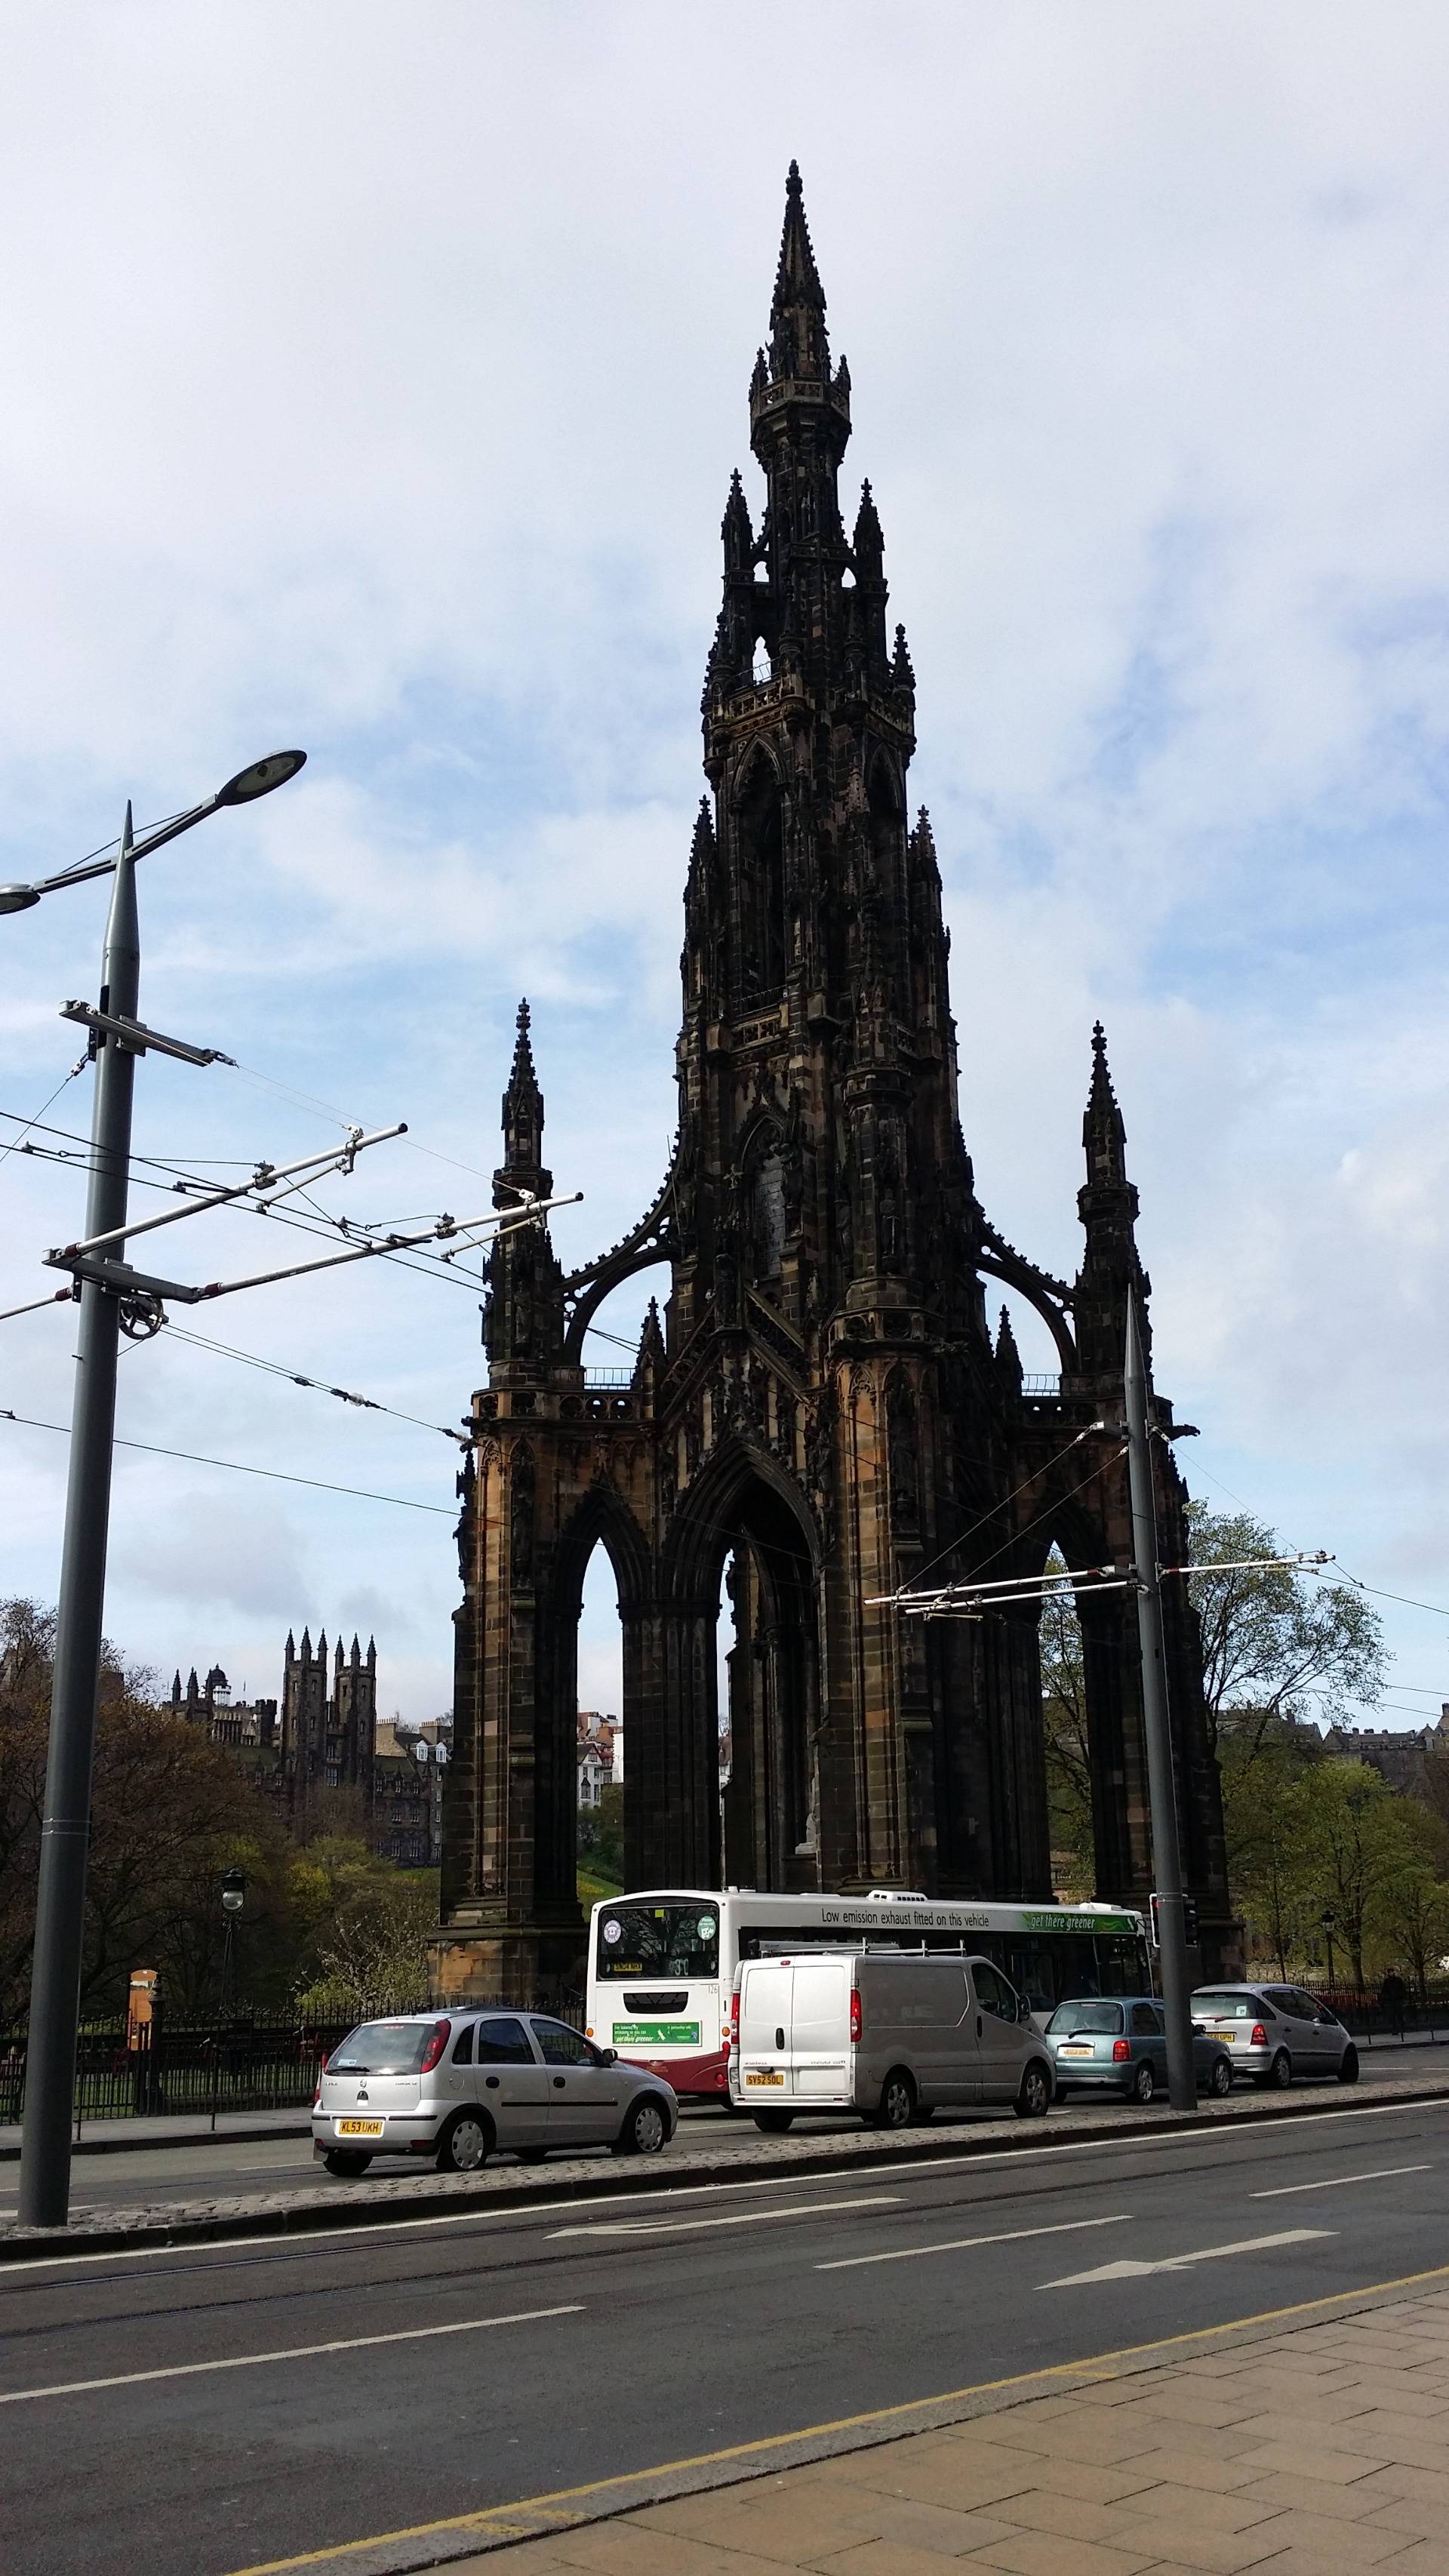 The Amazing Scotland: Part One "The Old Town & The New Town of Edinburgh"